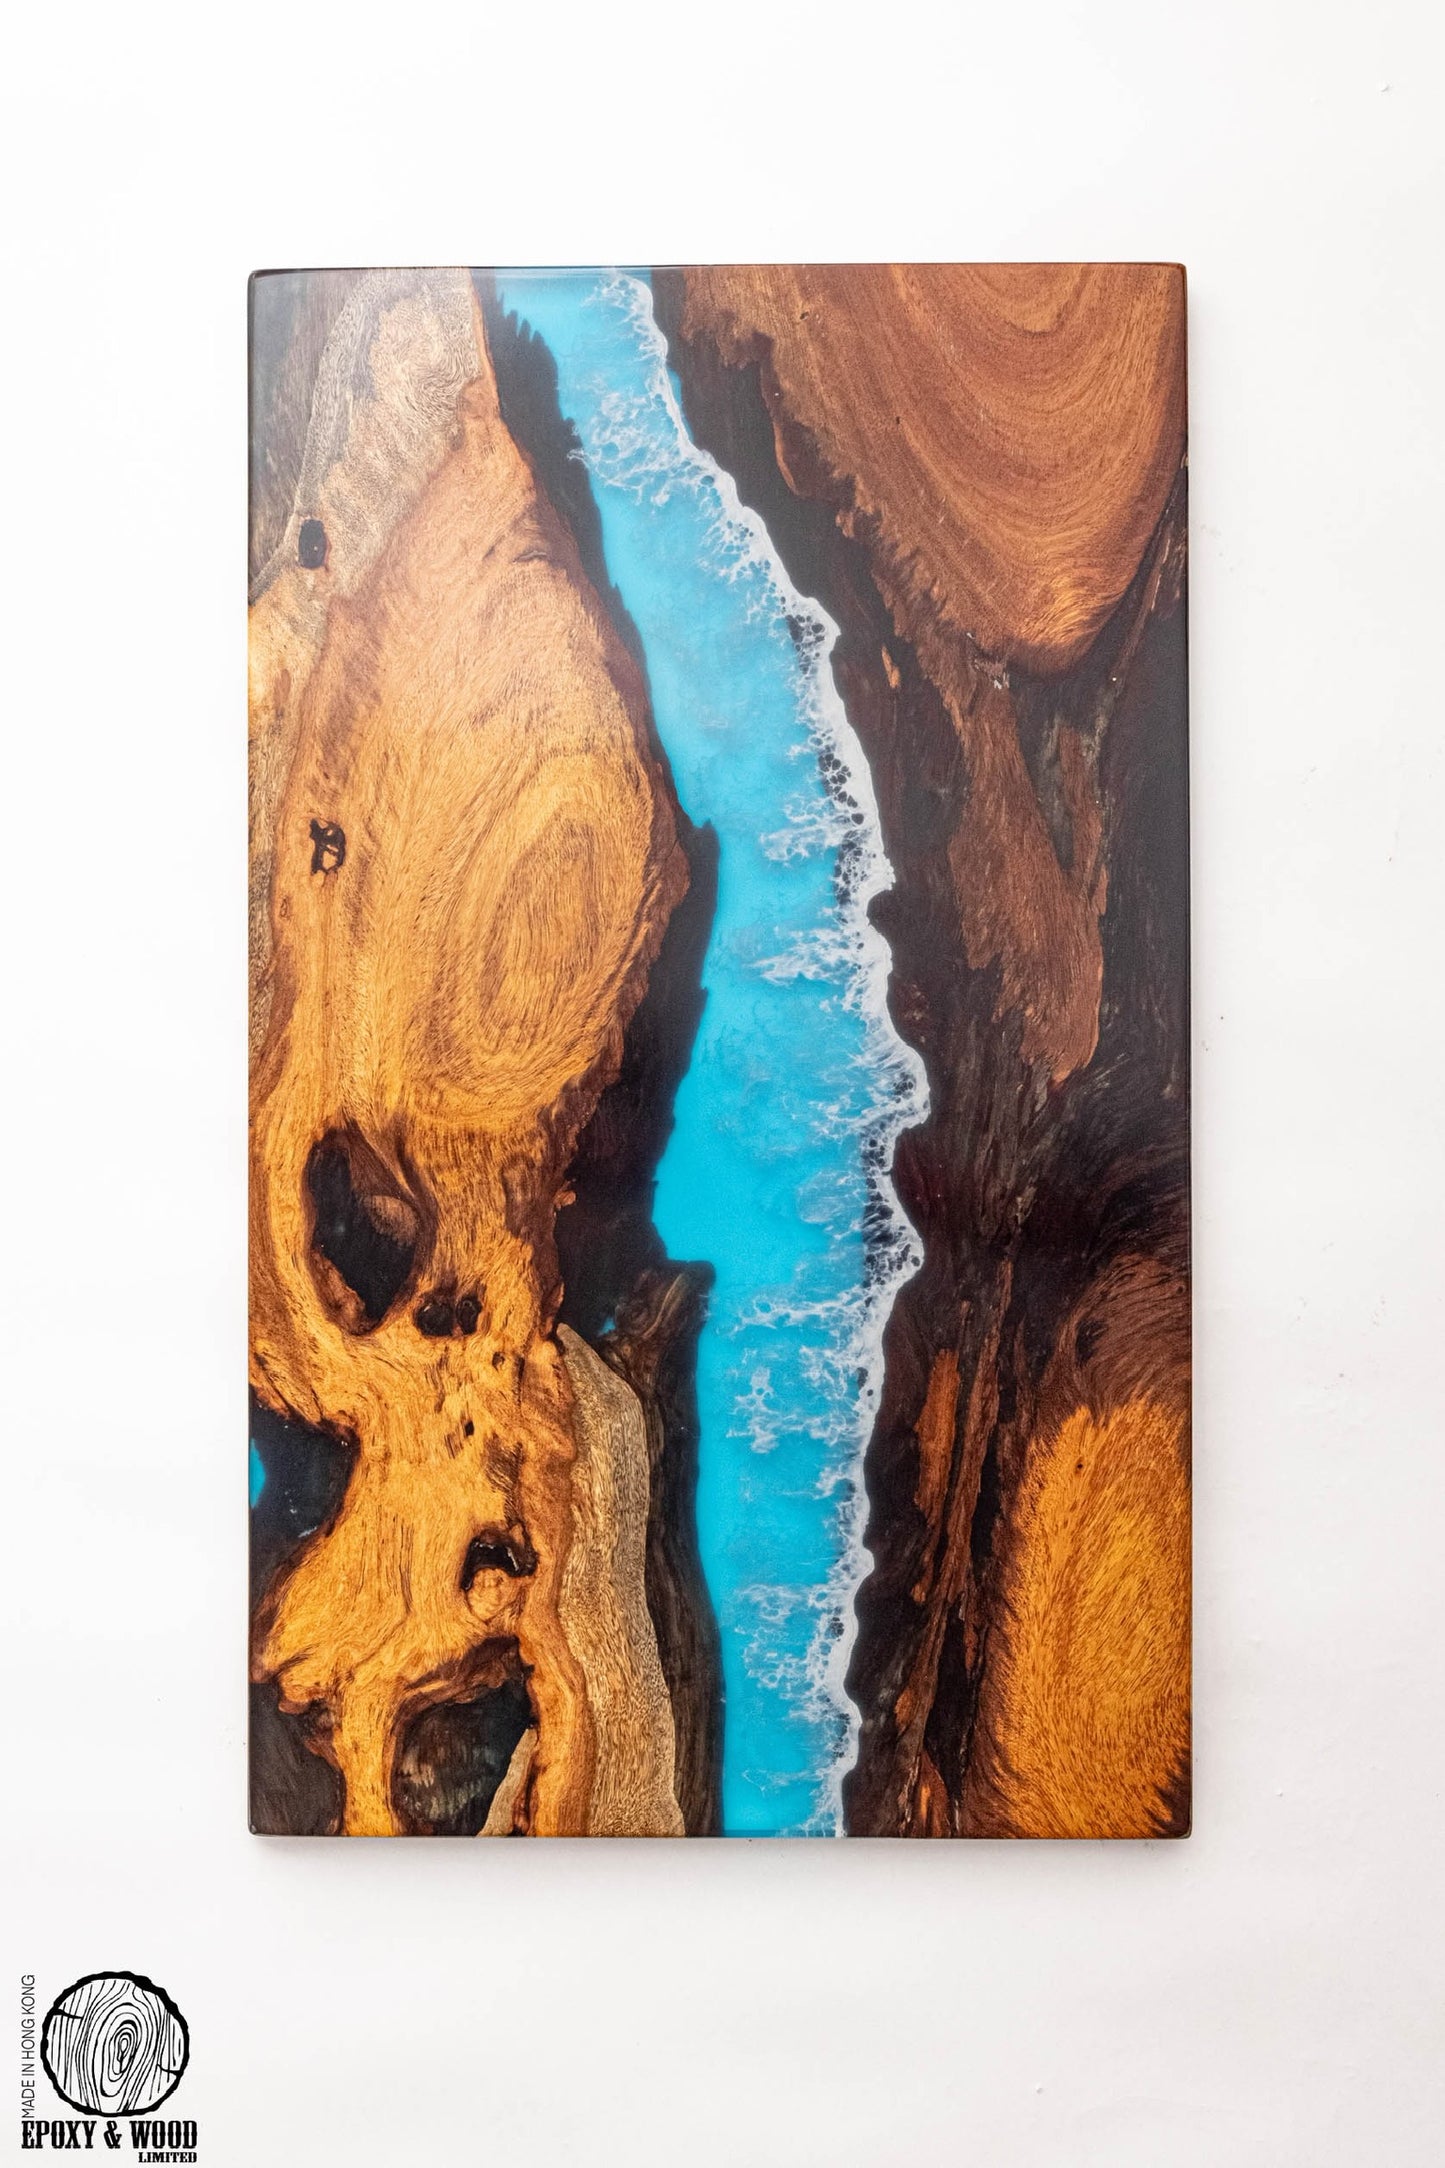 Camphor Wood Epoxy Resin Table with Ocean Waves Design 100x50cm